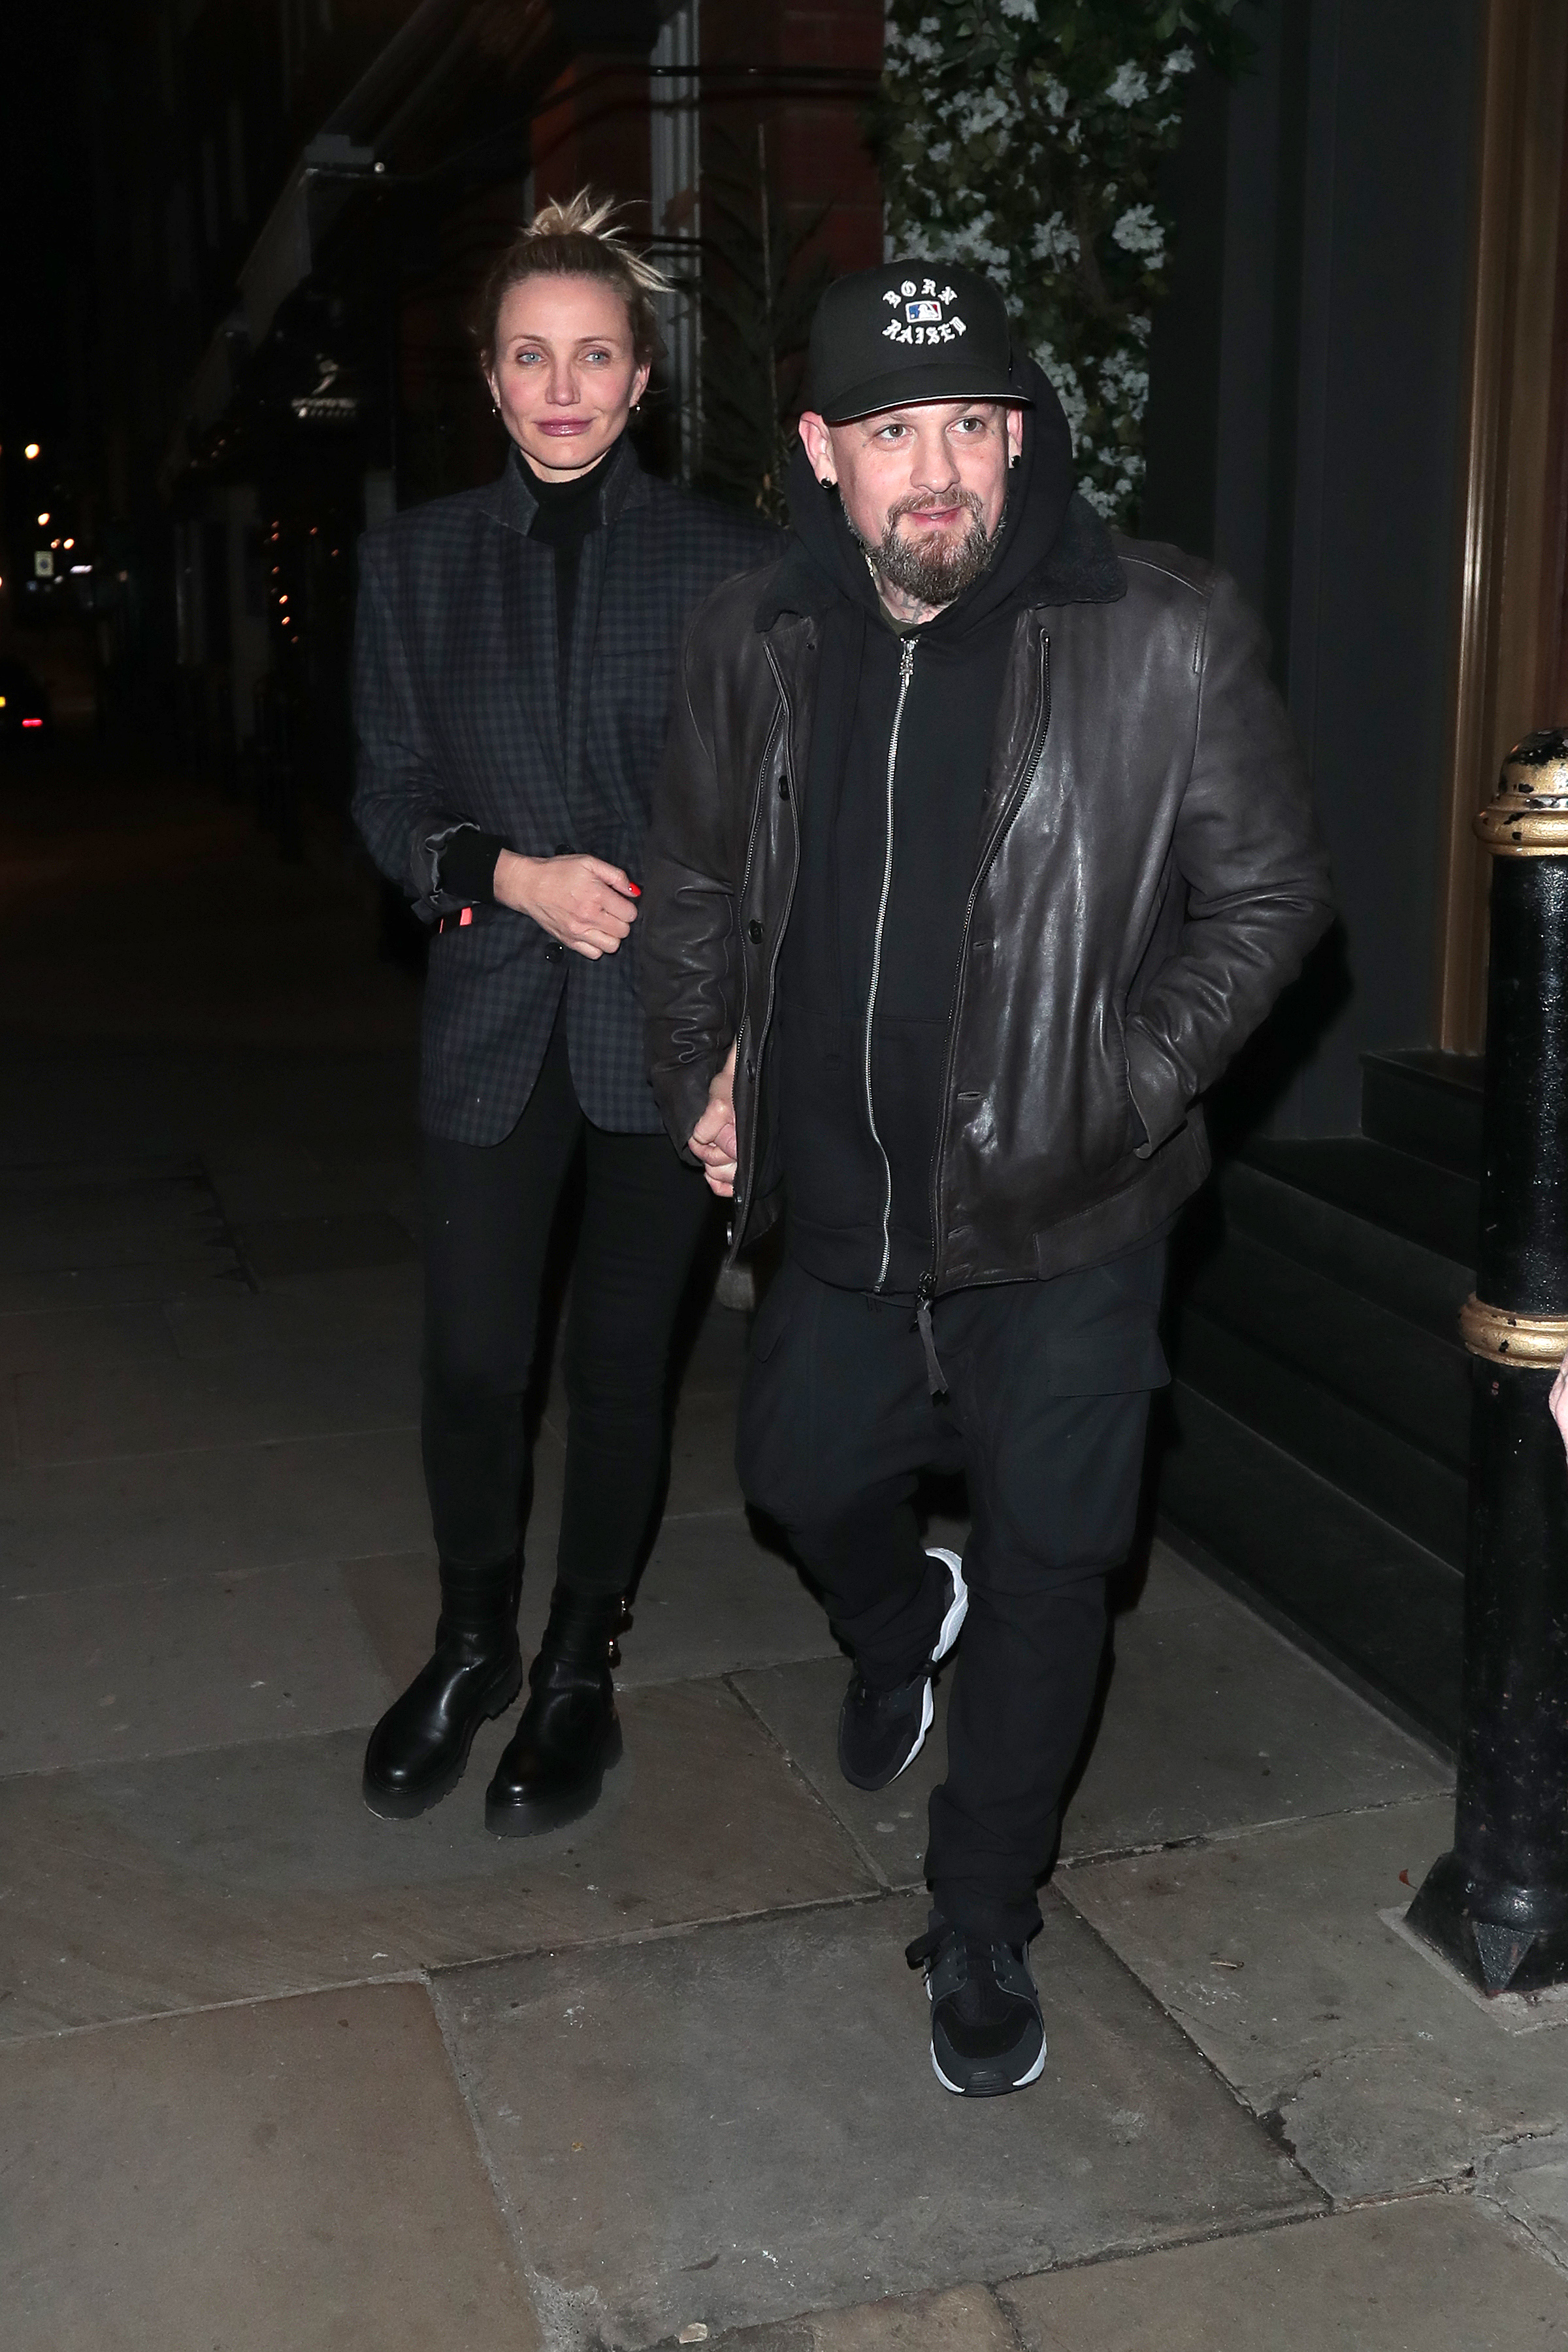 Cameron Diaz and Benji Madden spotted out in London, England on December 2, 2022 | Source: Getty Images